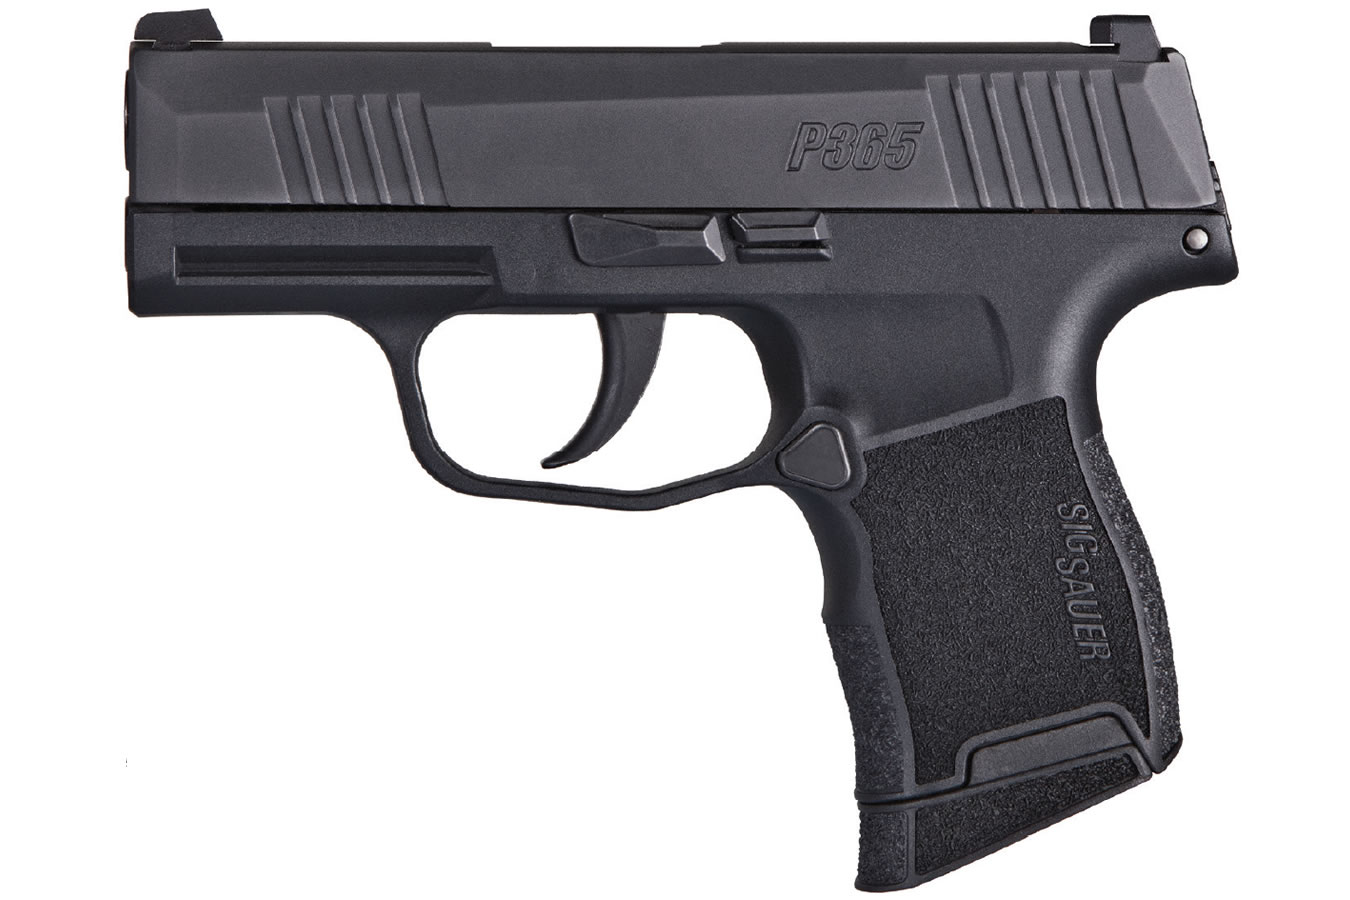 No. 7 Best Selling: SIG SAUER P365 9MM MICRO COMPACT PISTOL